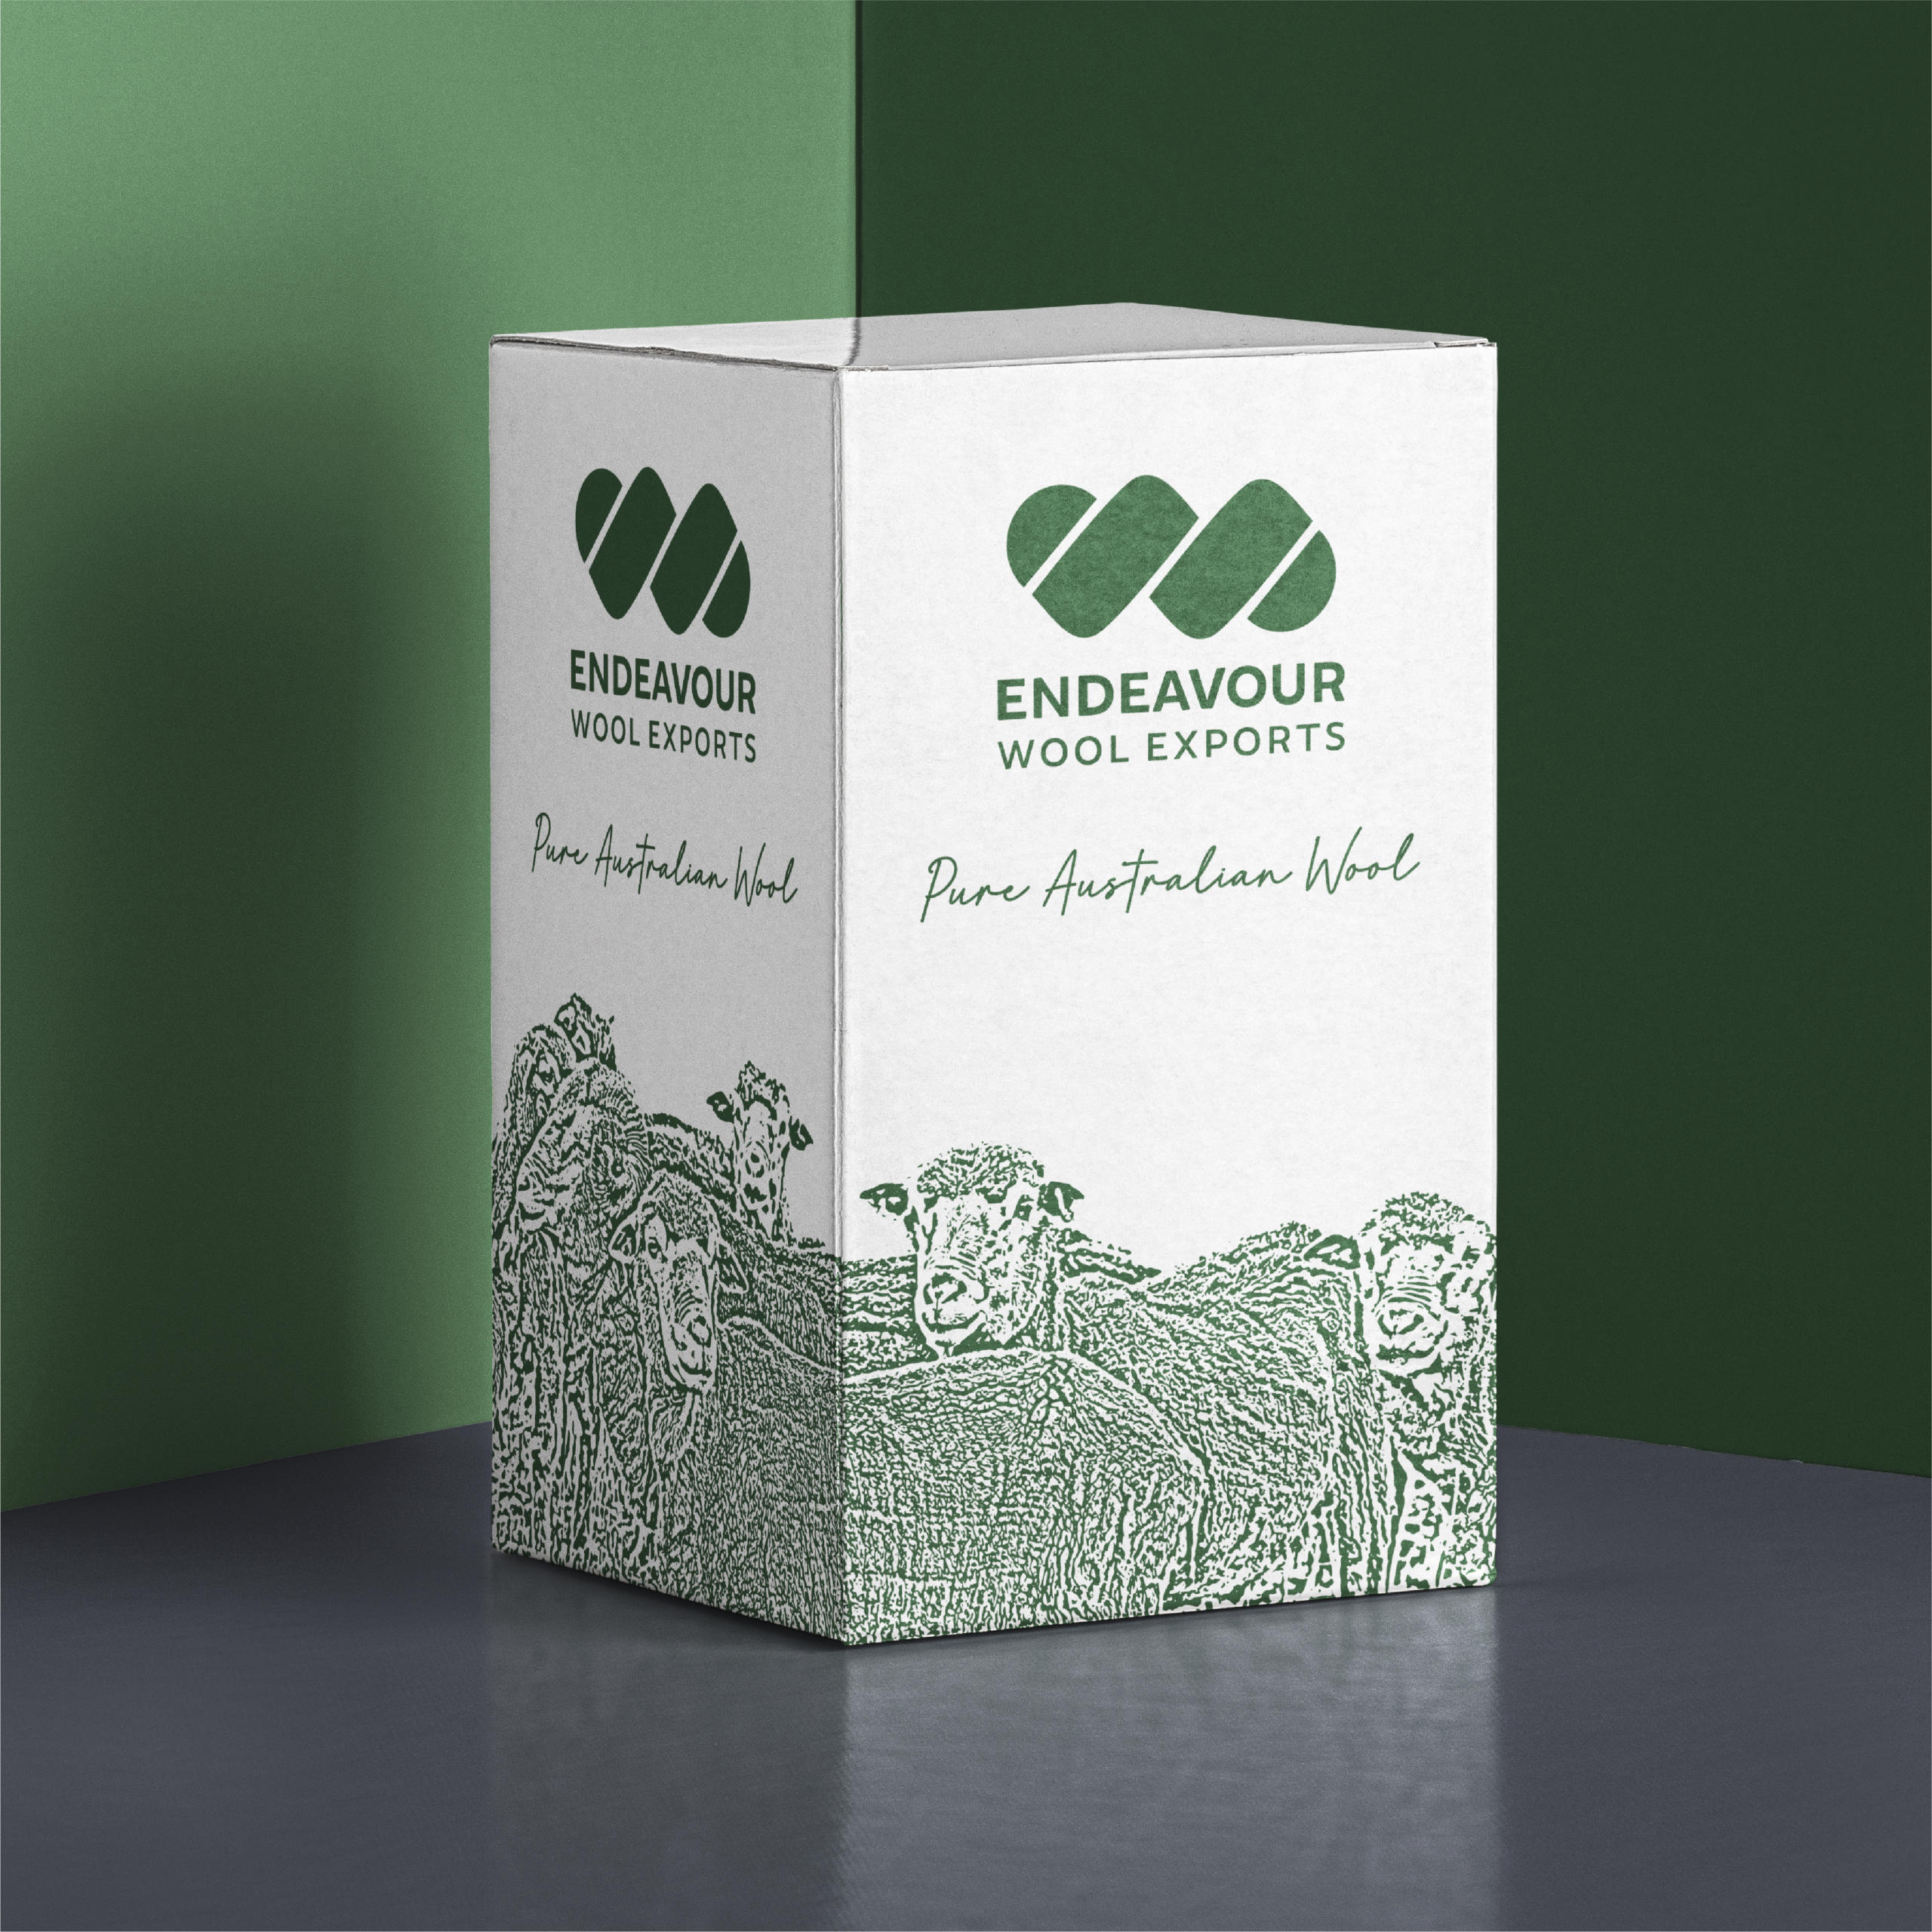 Endeavour Wool Exports Packaging Design